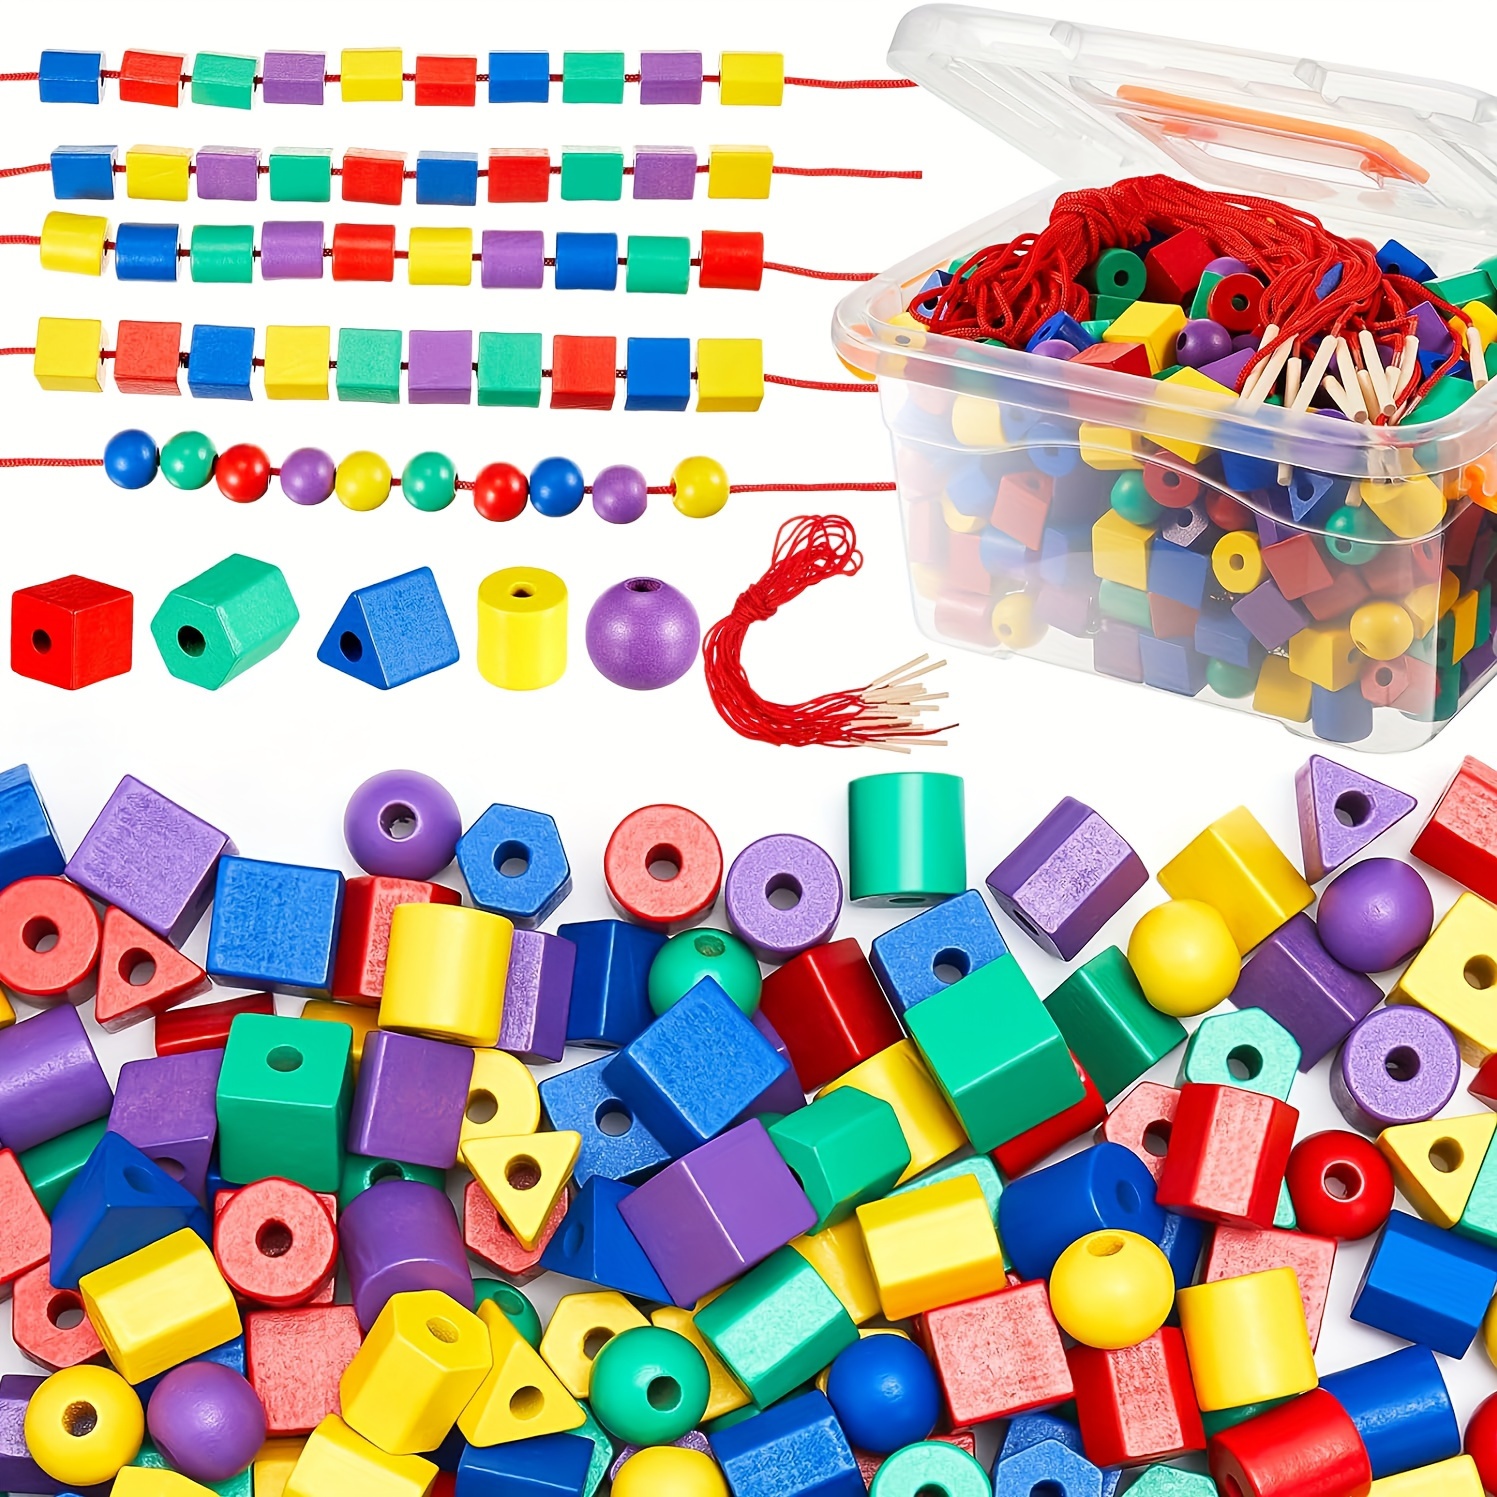 

80-piece Montessori Lacing Beads Set For Toddlers - Color & Shape Sorting, Includes String And Bag For Preschool Occupational Therapy